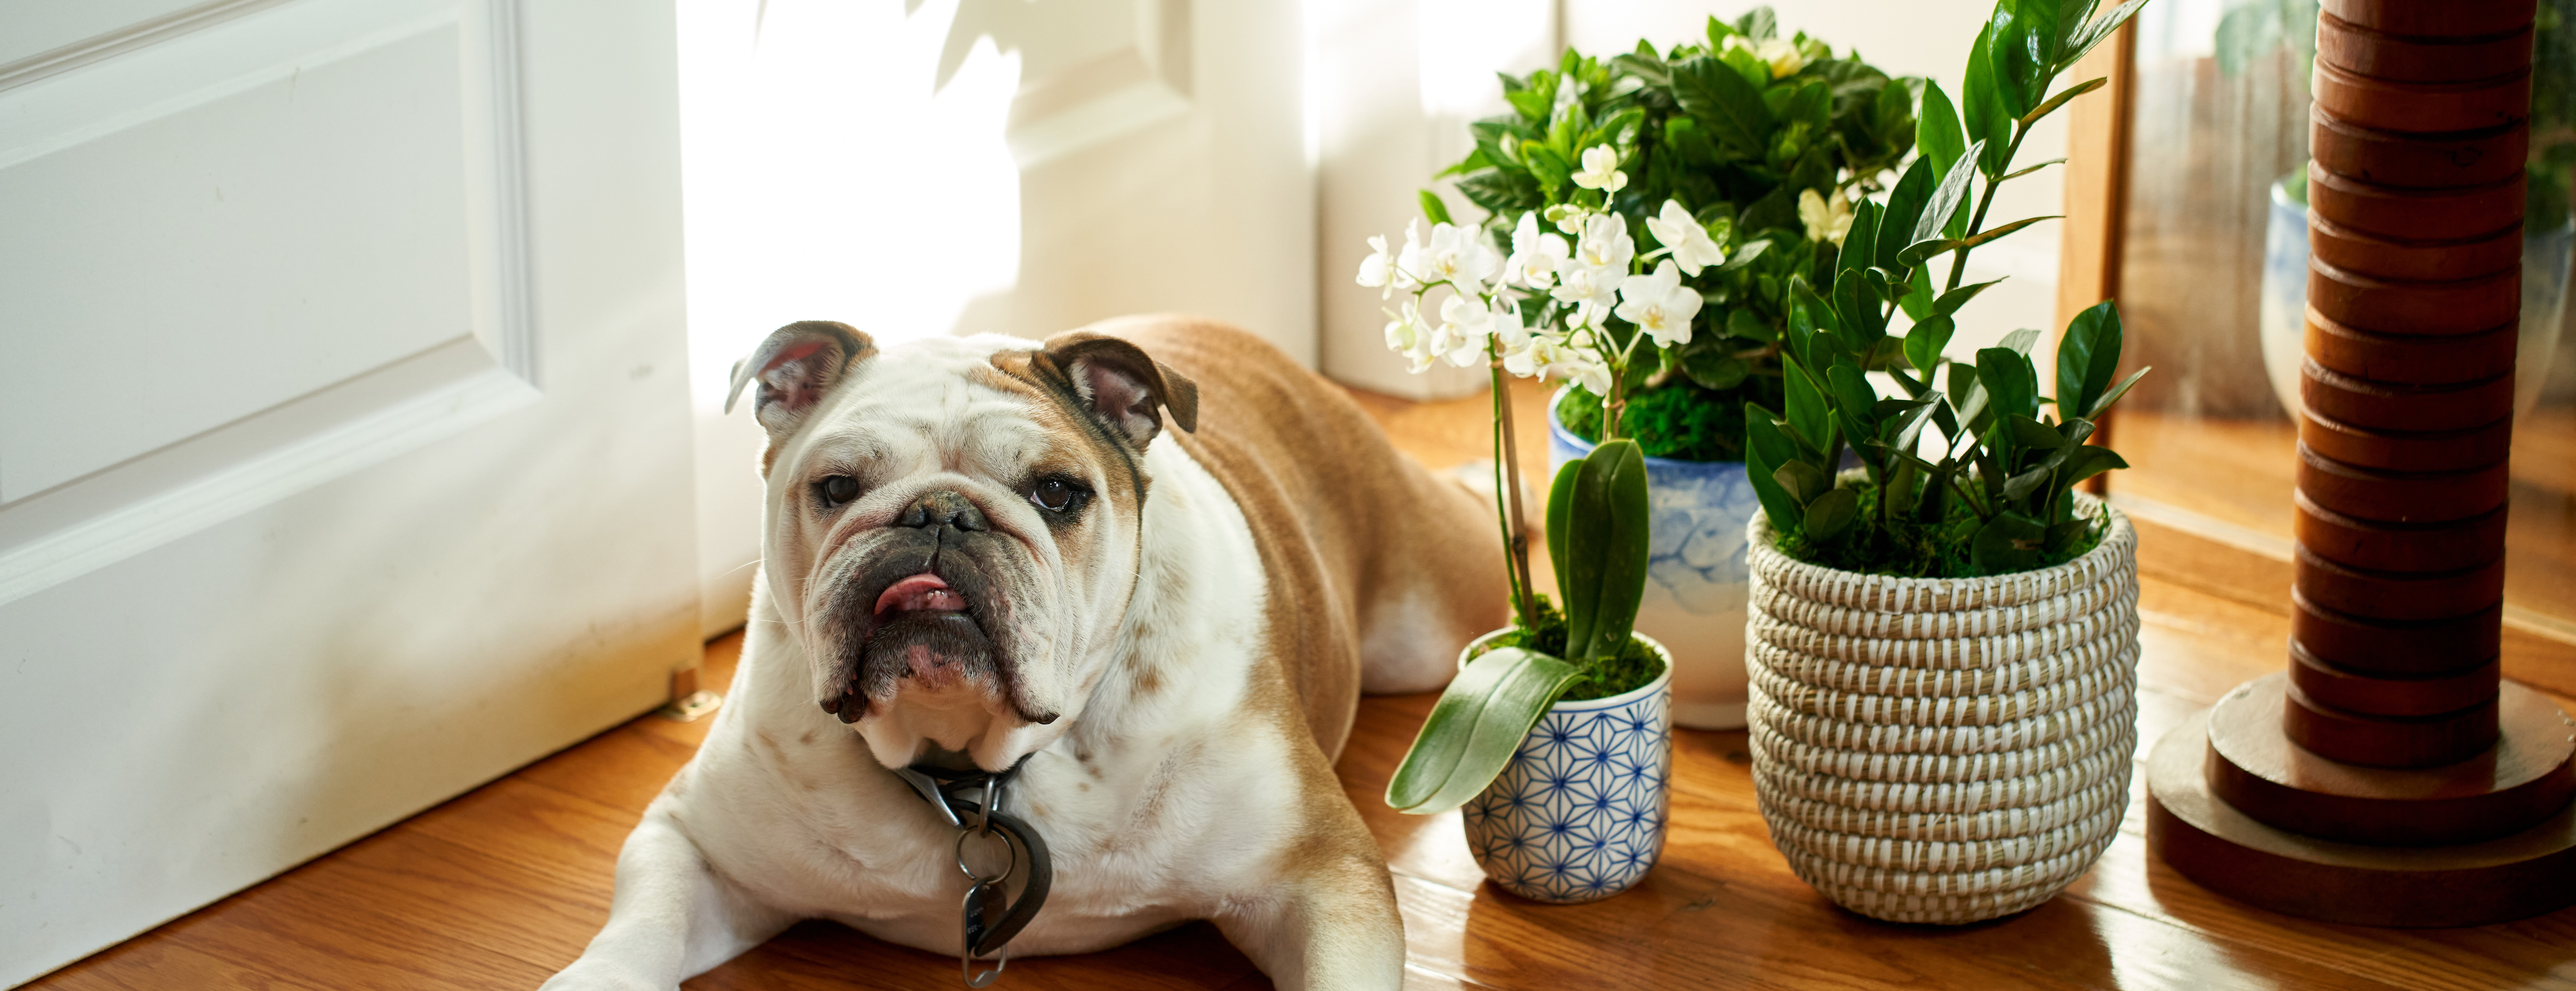 Dog laying on floor among various pet-friendly plants